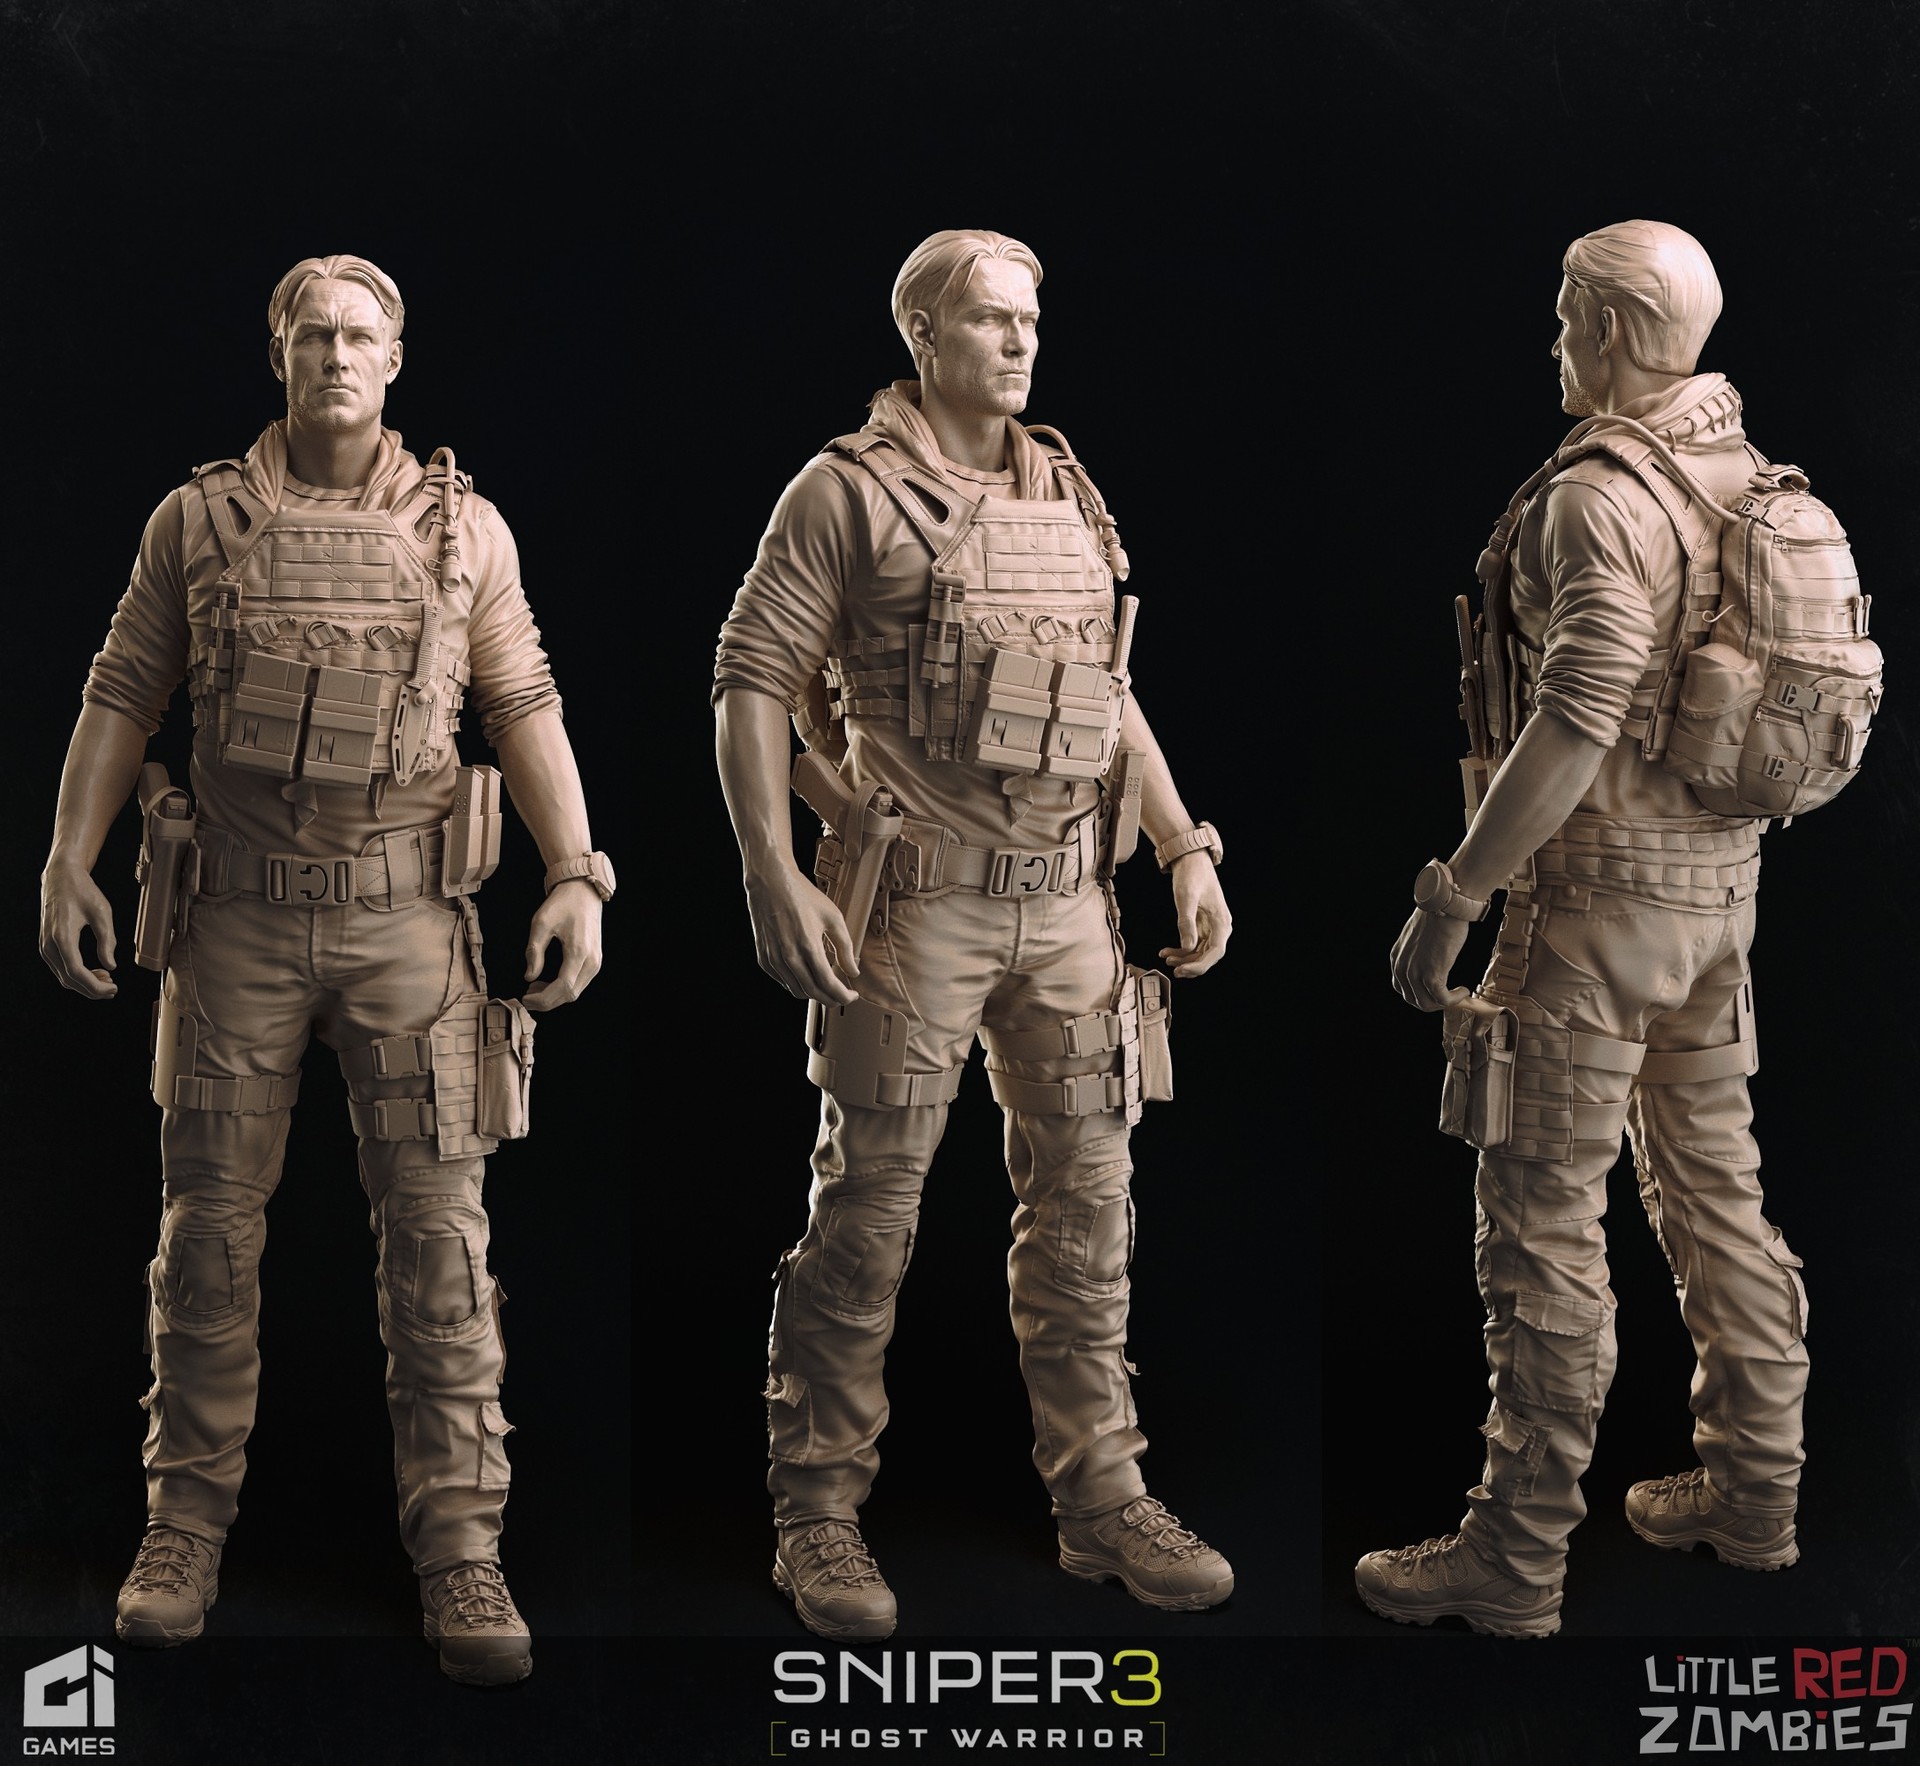 little-red-zombies-004-johnnorth-armor-medium-attachments-exposure.jpg